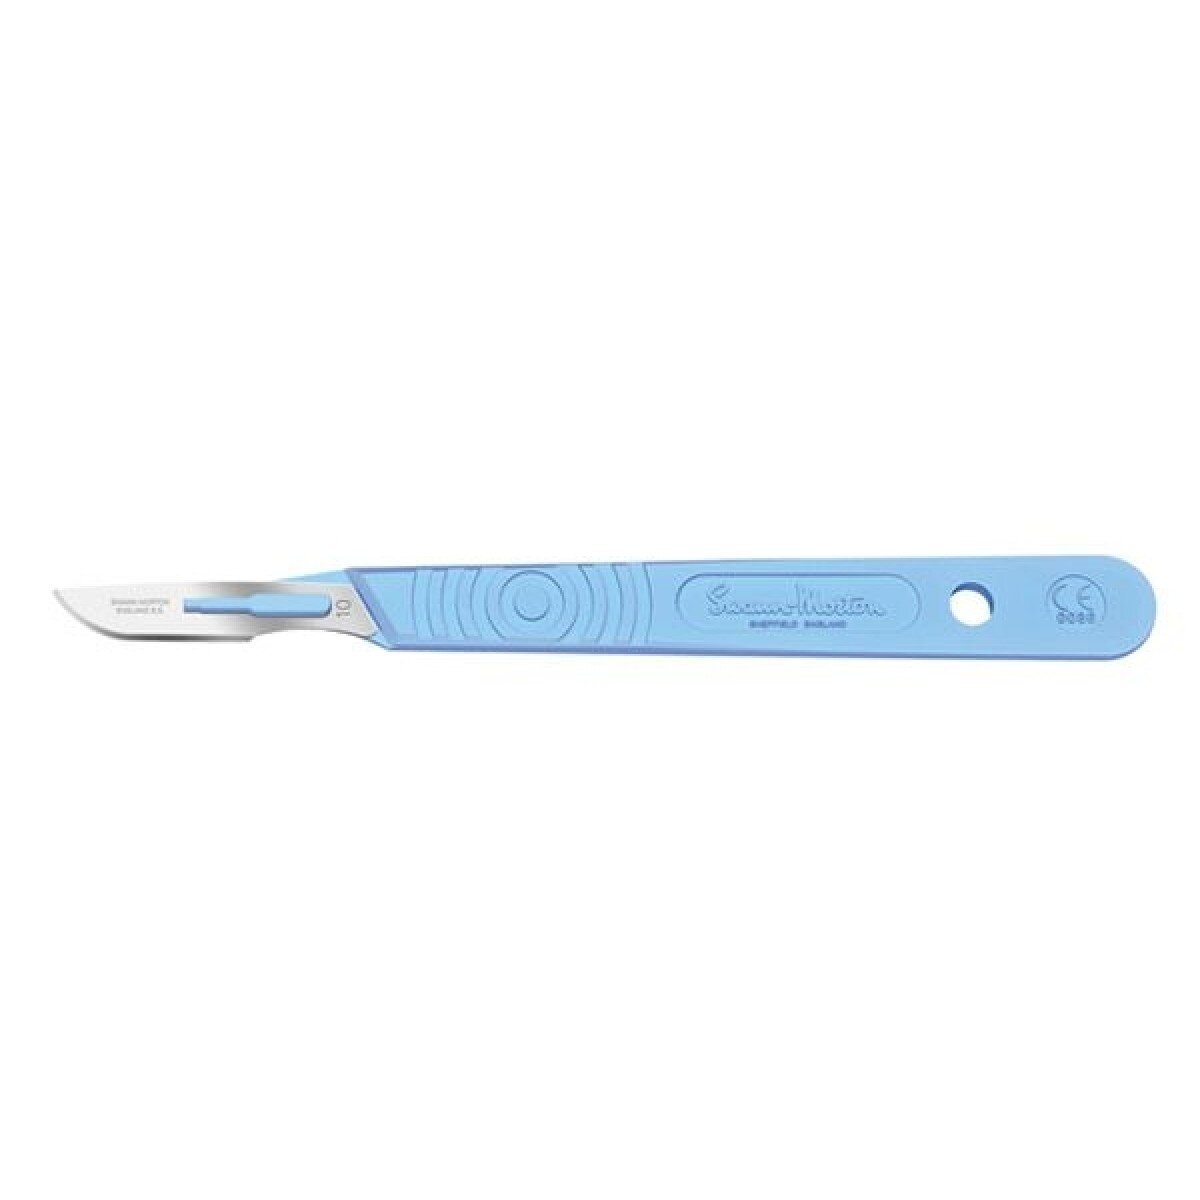 #10 Swann Morton Dermaplaning Disposable Scalpels - Stainless Steel, Sterile, Box of 10